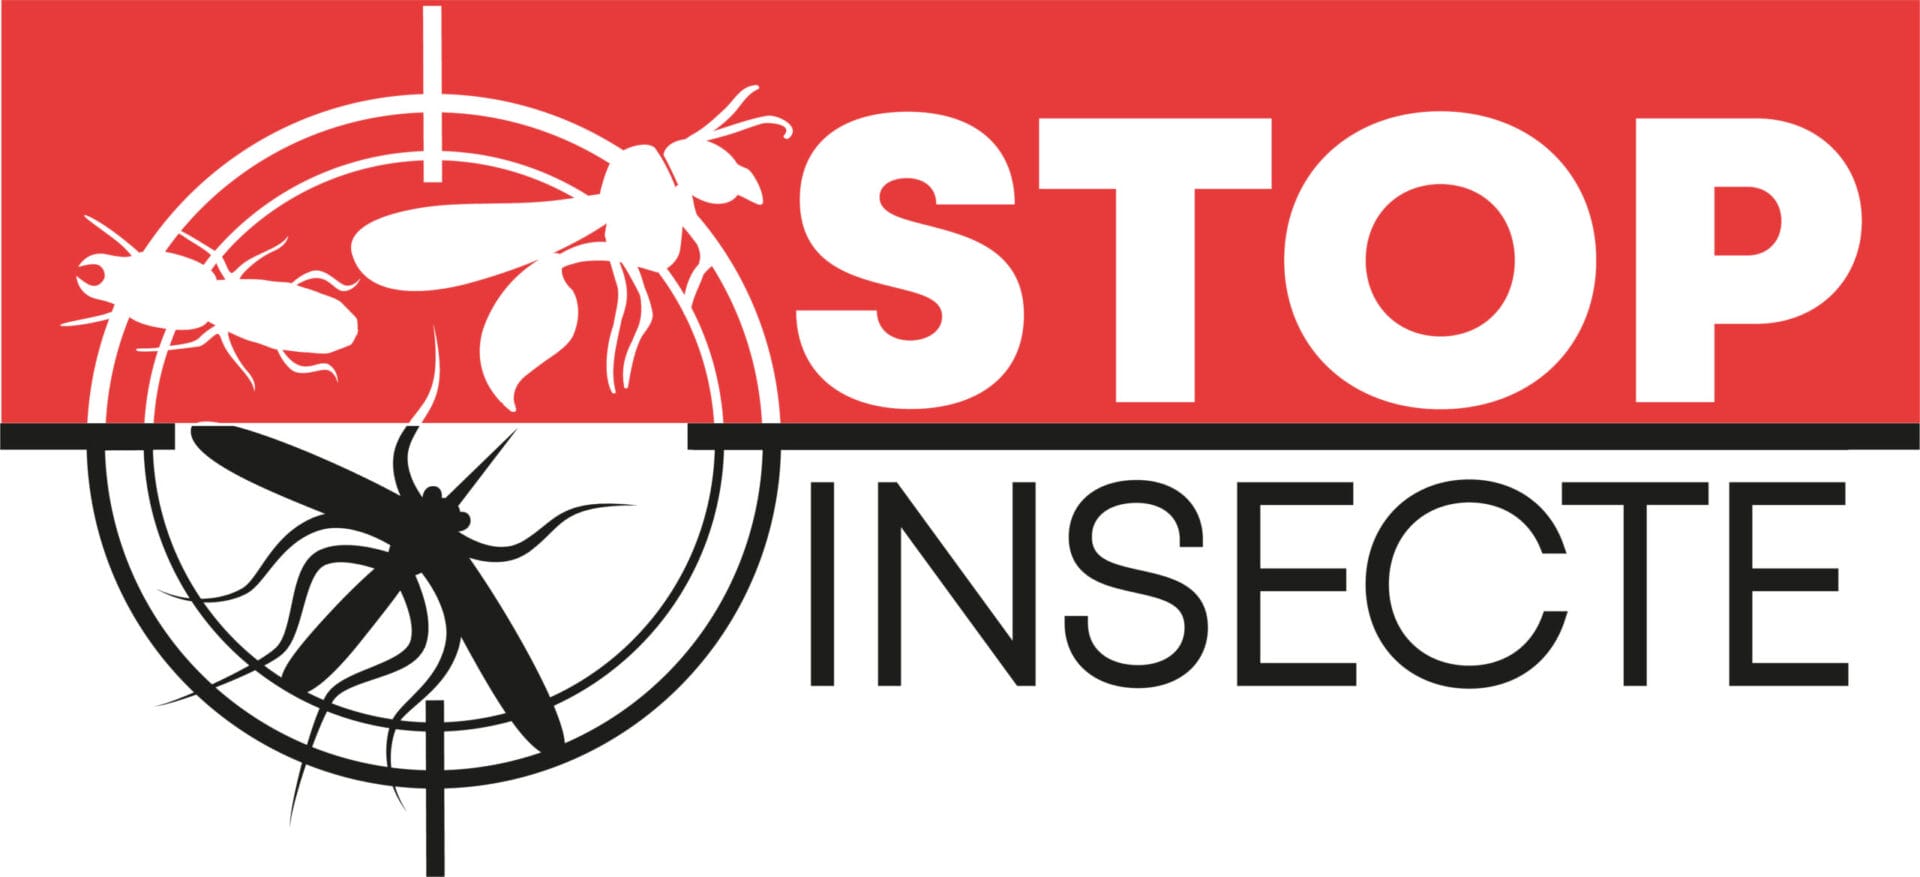 Stop insectes